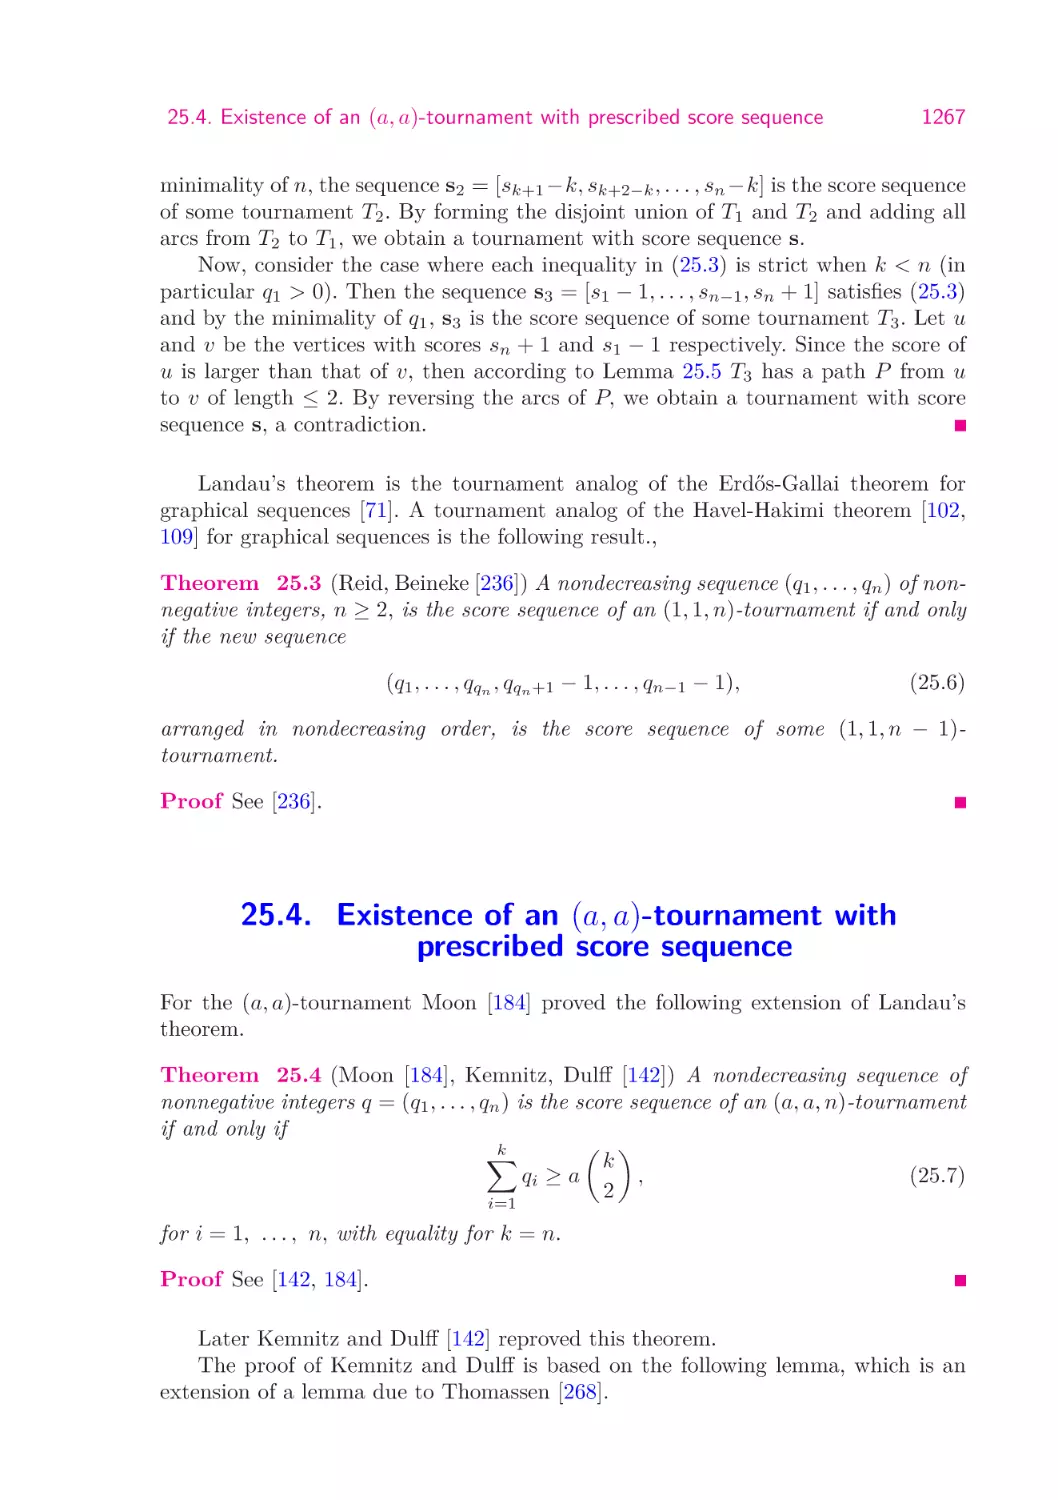 25.4.  Existence of an (a,a)-tournament with prescribed score sequence